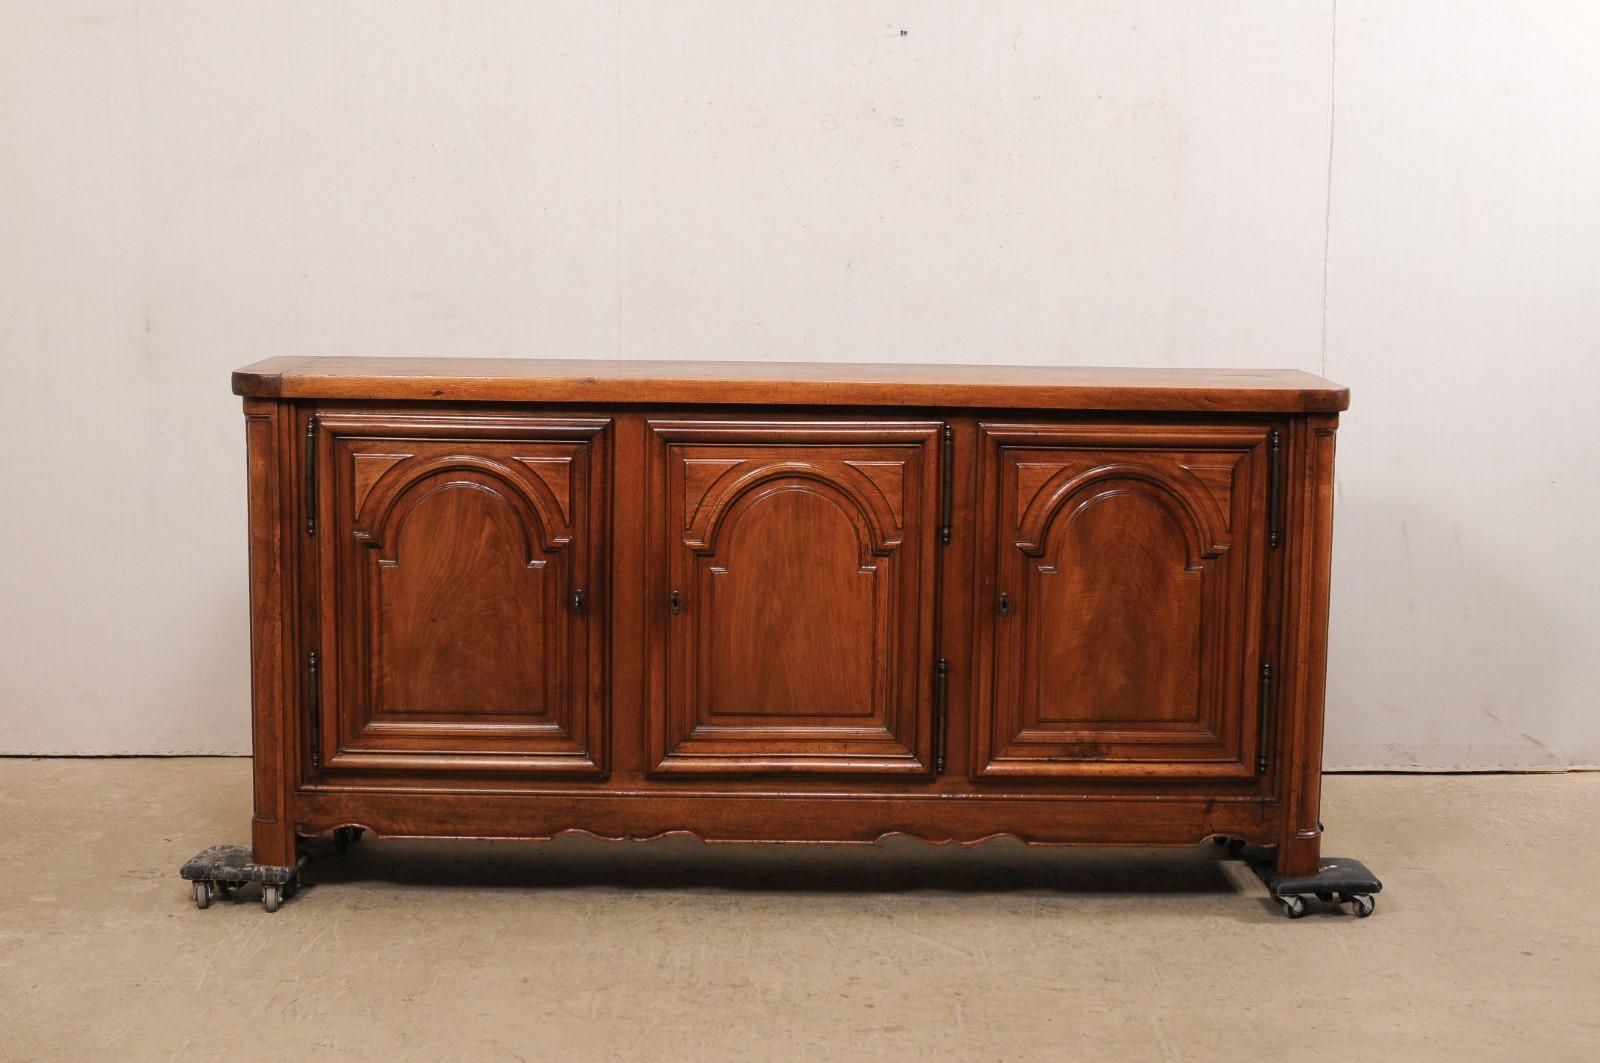 A French carved-wood, three-door buffet cabinet from the 18th century. This antique cabinet from France, which is approximately 7.5 feet in length, features a rectangular-shaped top, with softly rounded front corners, which rests above a case which